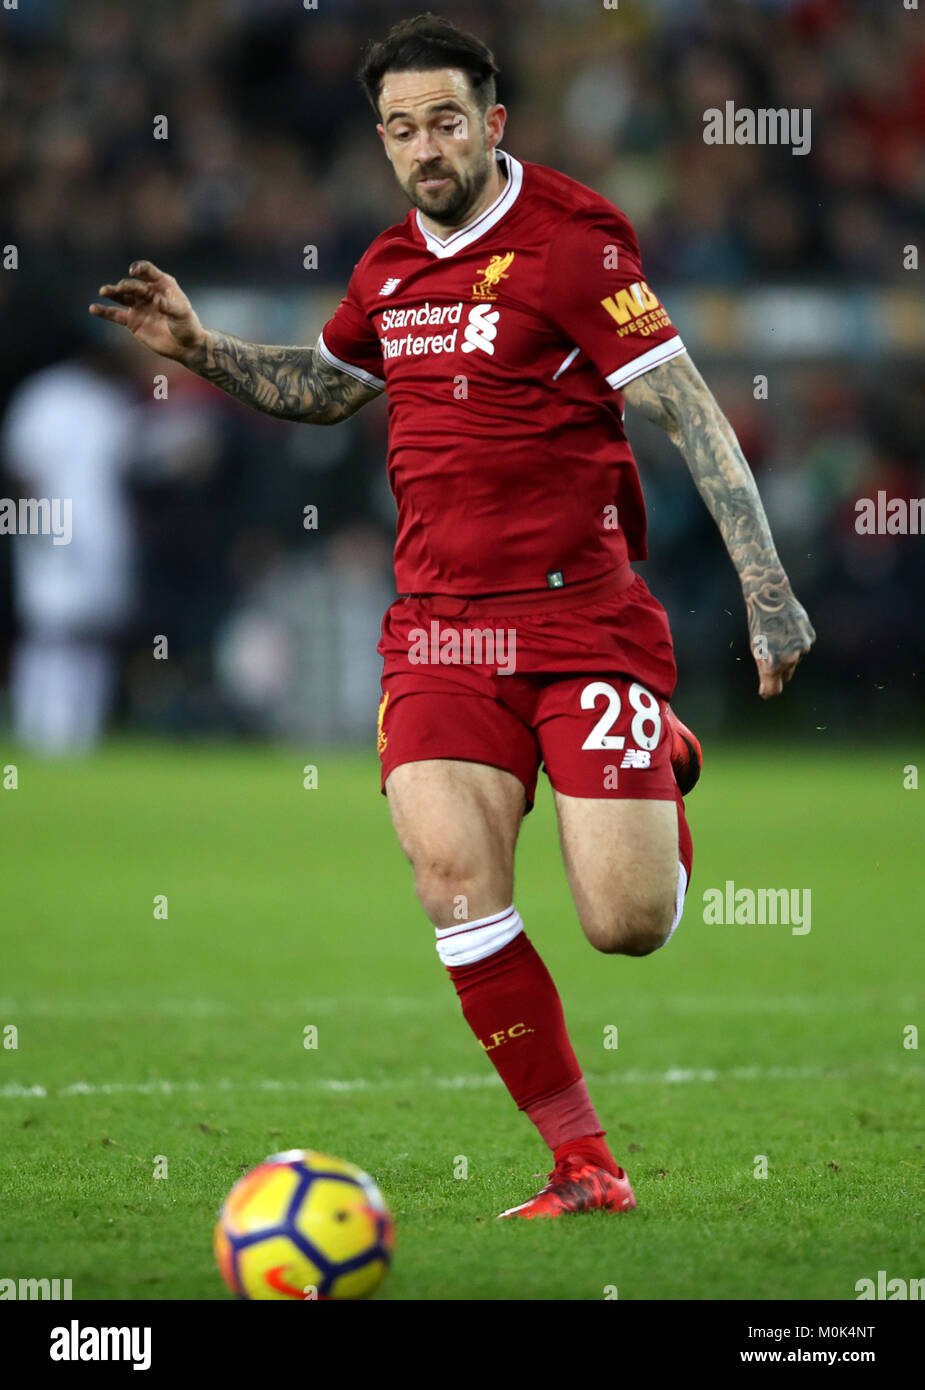 Liverpool's Danny Ings during the Premier League match at the Liberty Stadium, Swansea. PRESS ASSOCIATION Photo. Picture date: Monday January 22, 2018. See PA story SOCCER Swansea. Photo credit should read: Nick Potts/PA Wire. RESTRICTIONS: No use with unauthorised audio, video, data, fixture lists, club/league logos or 'live' services. Online in-match use limited to 75 images, no video emulation. No use in betting, games or single club/league/player publications. Stock Photo